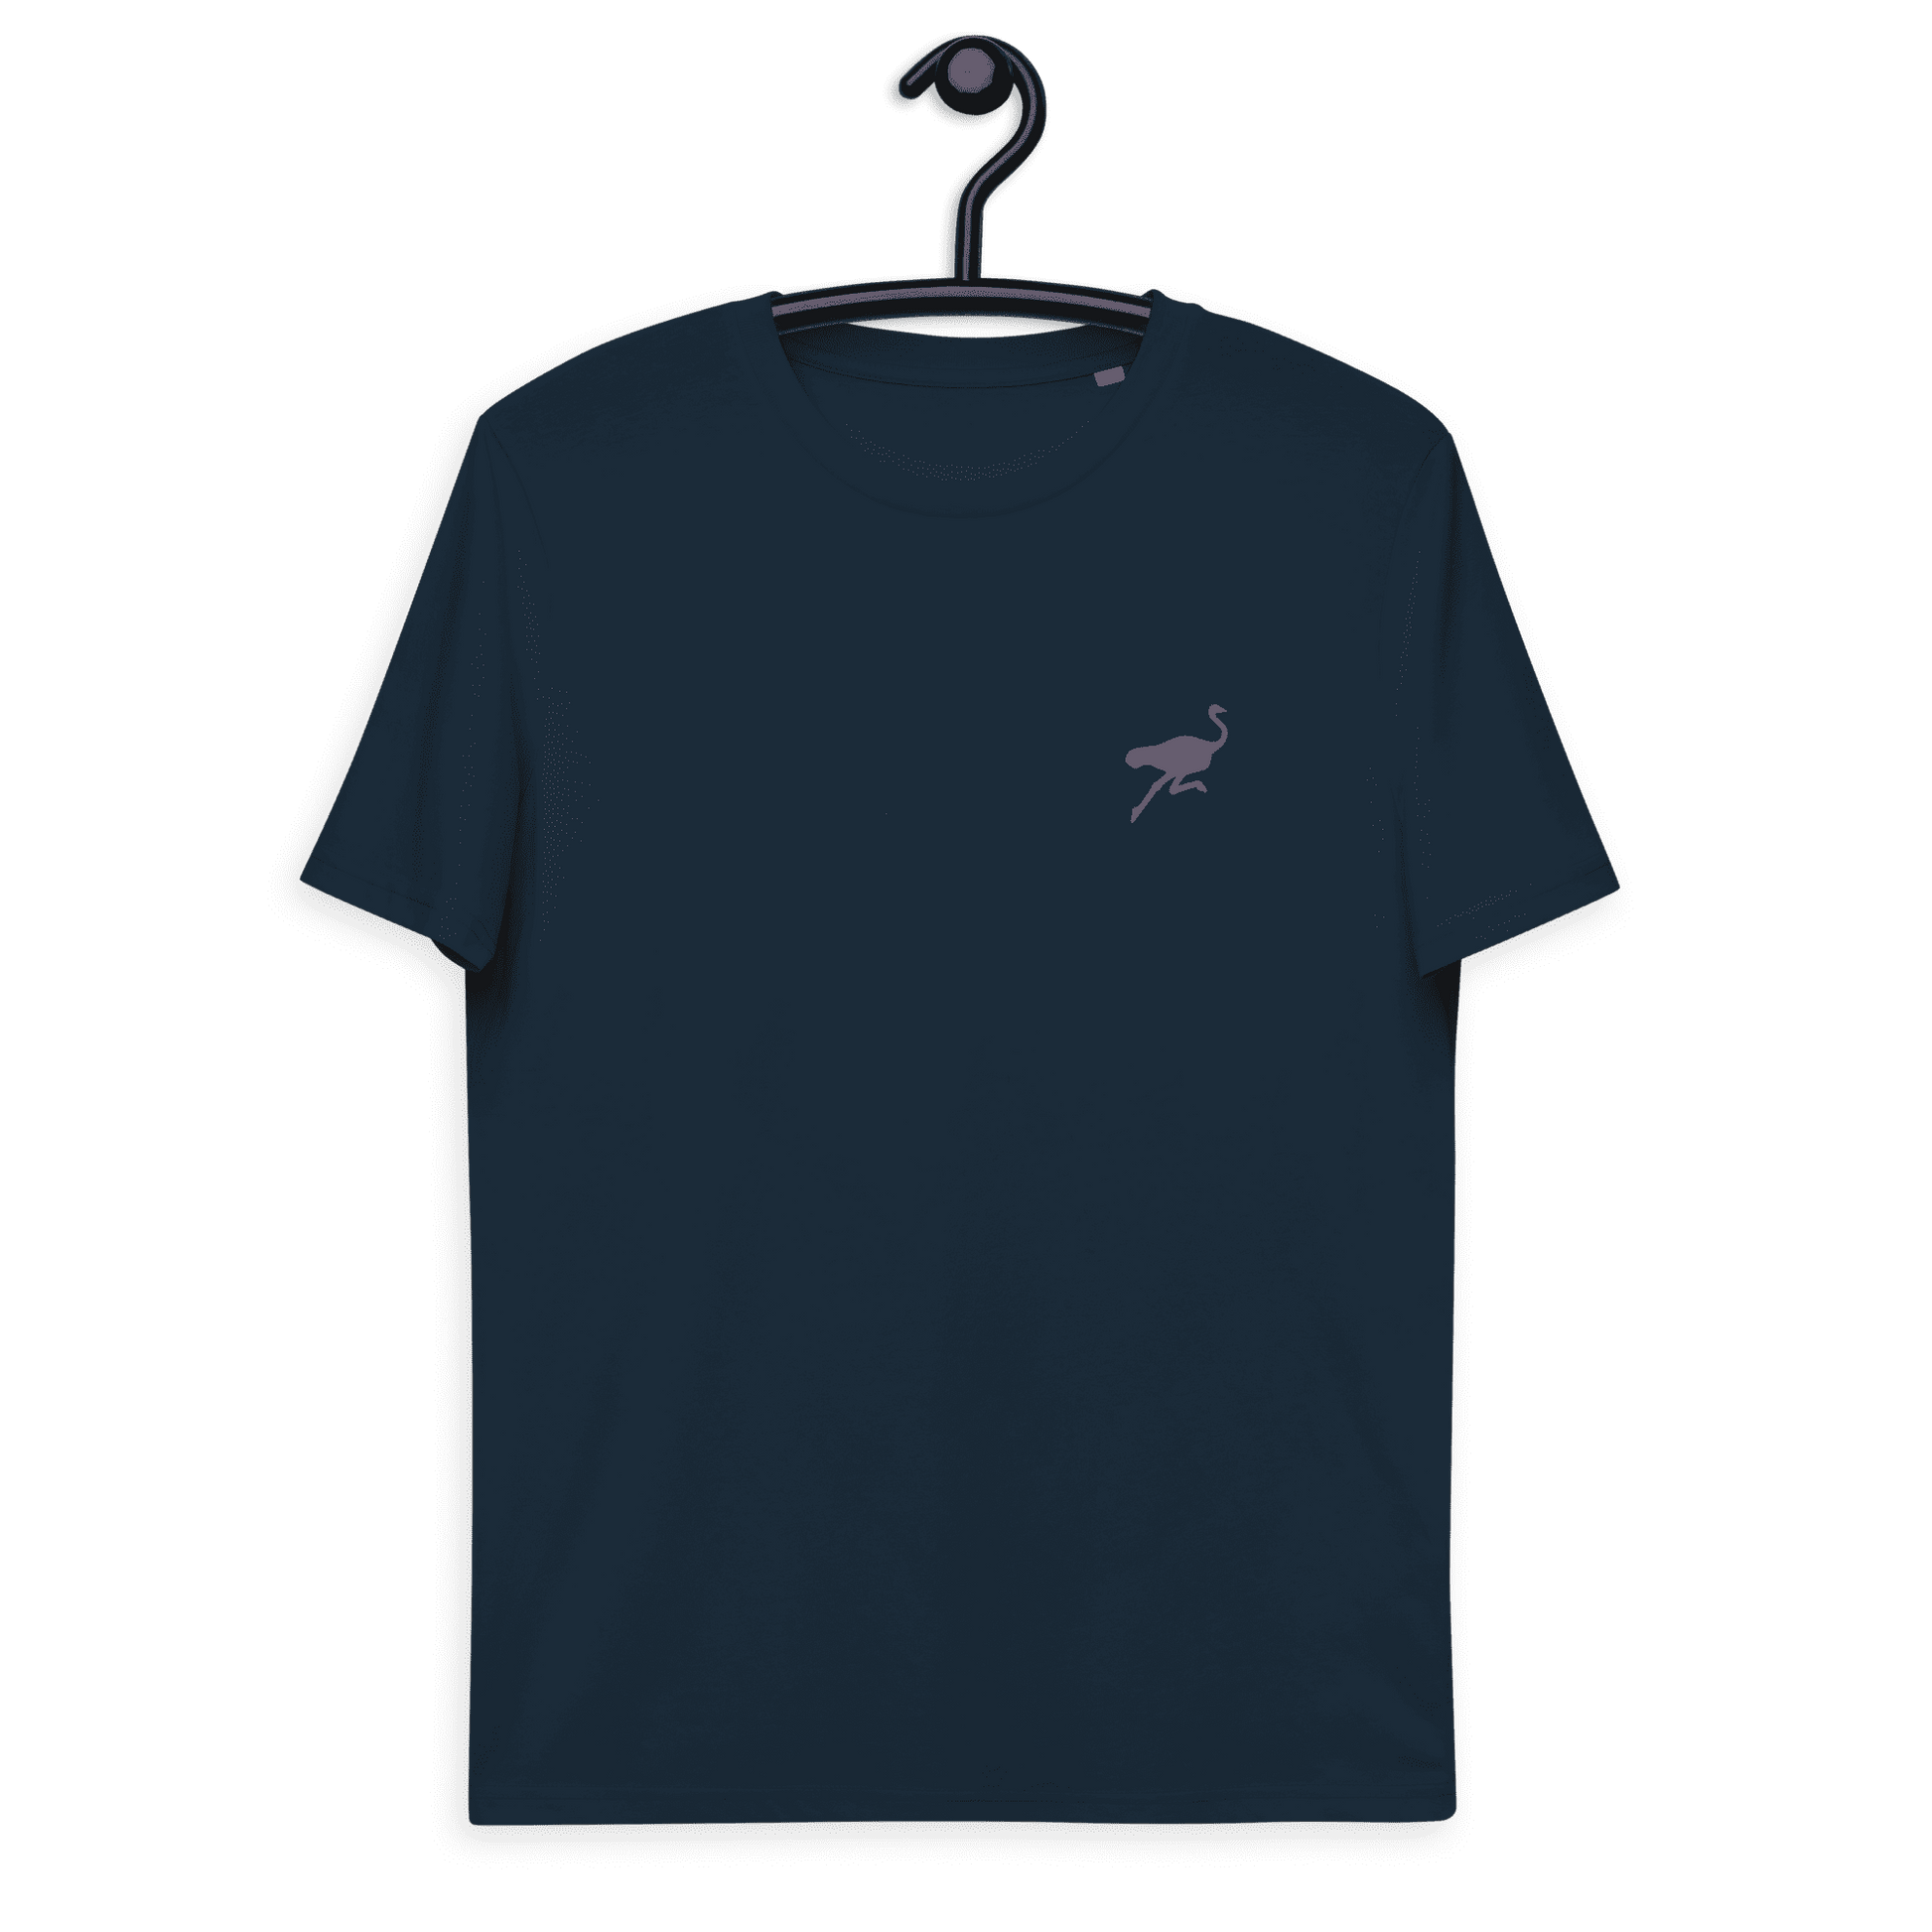 Front view of a navy colored nostr shirt.